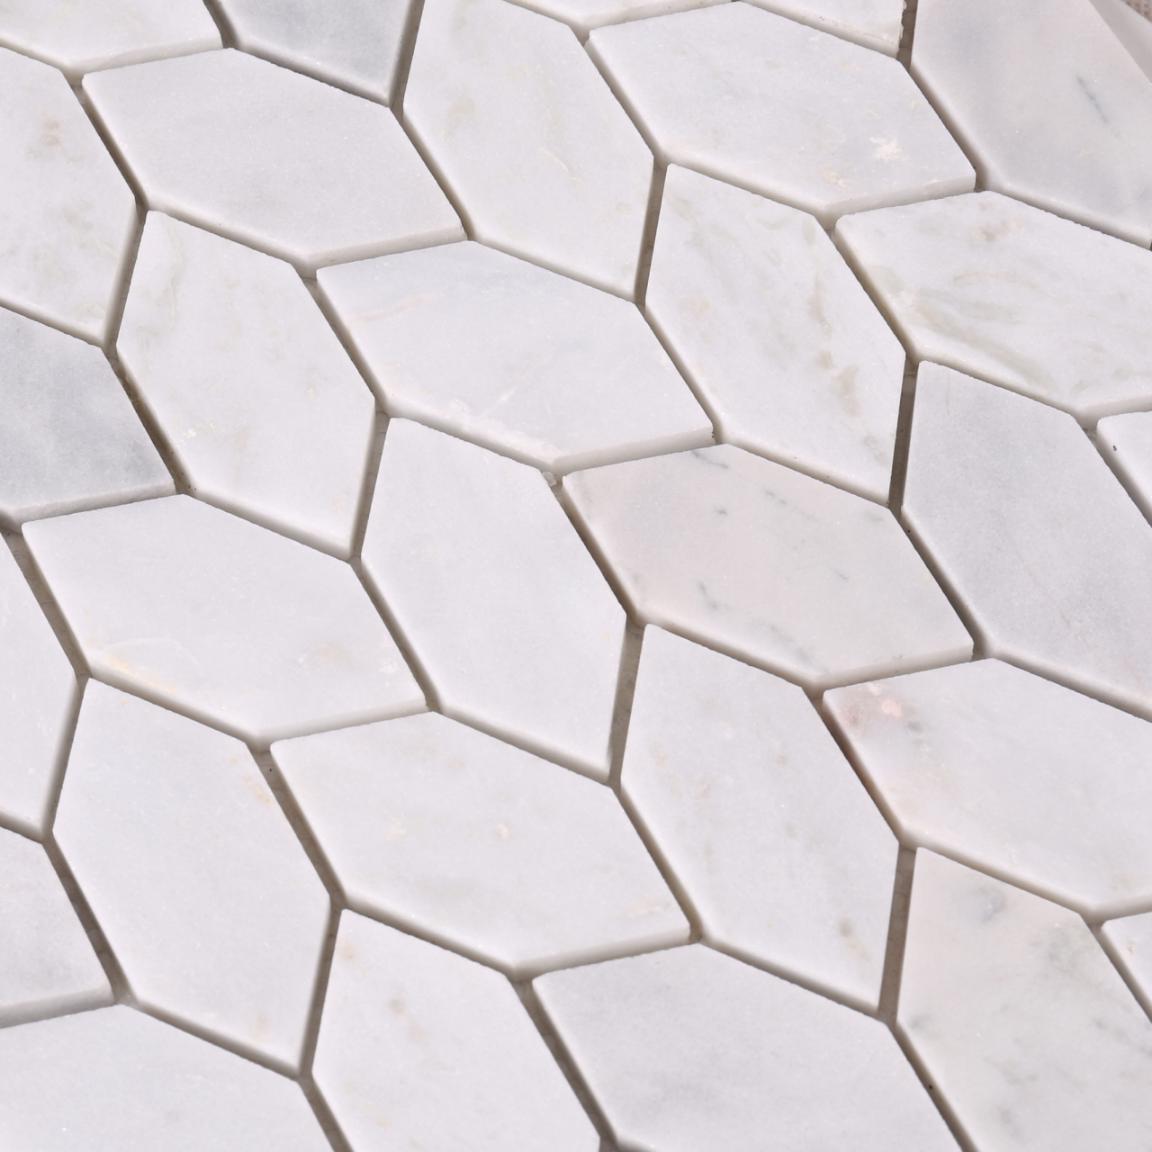 Heng Xing quality glass mosaic tiles dealers in oman directly sale for hotel-5